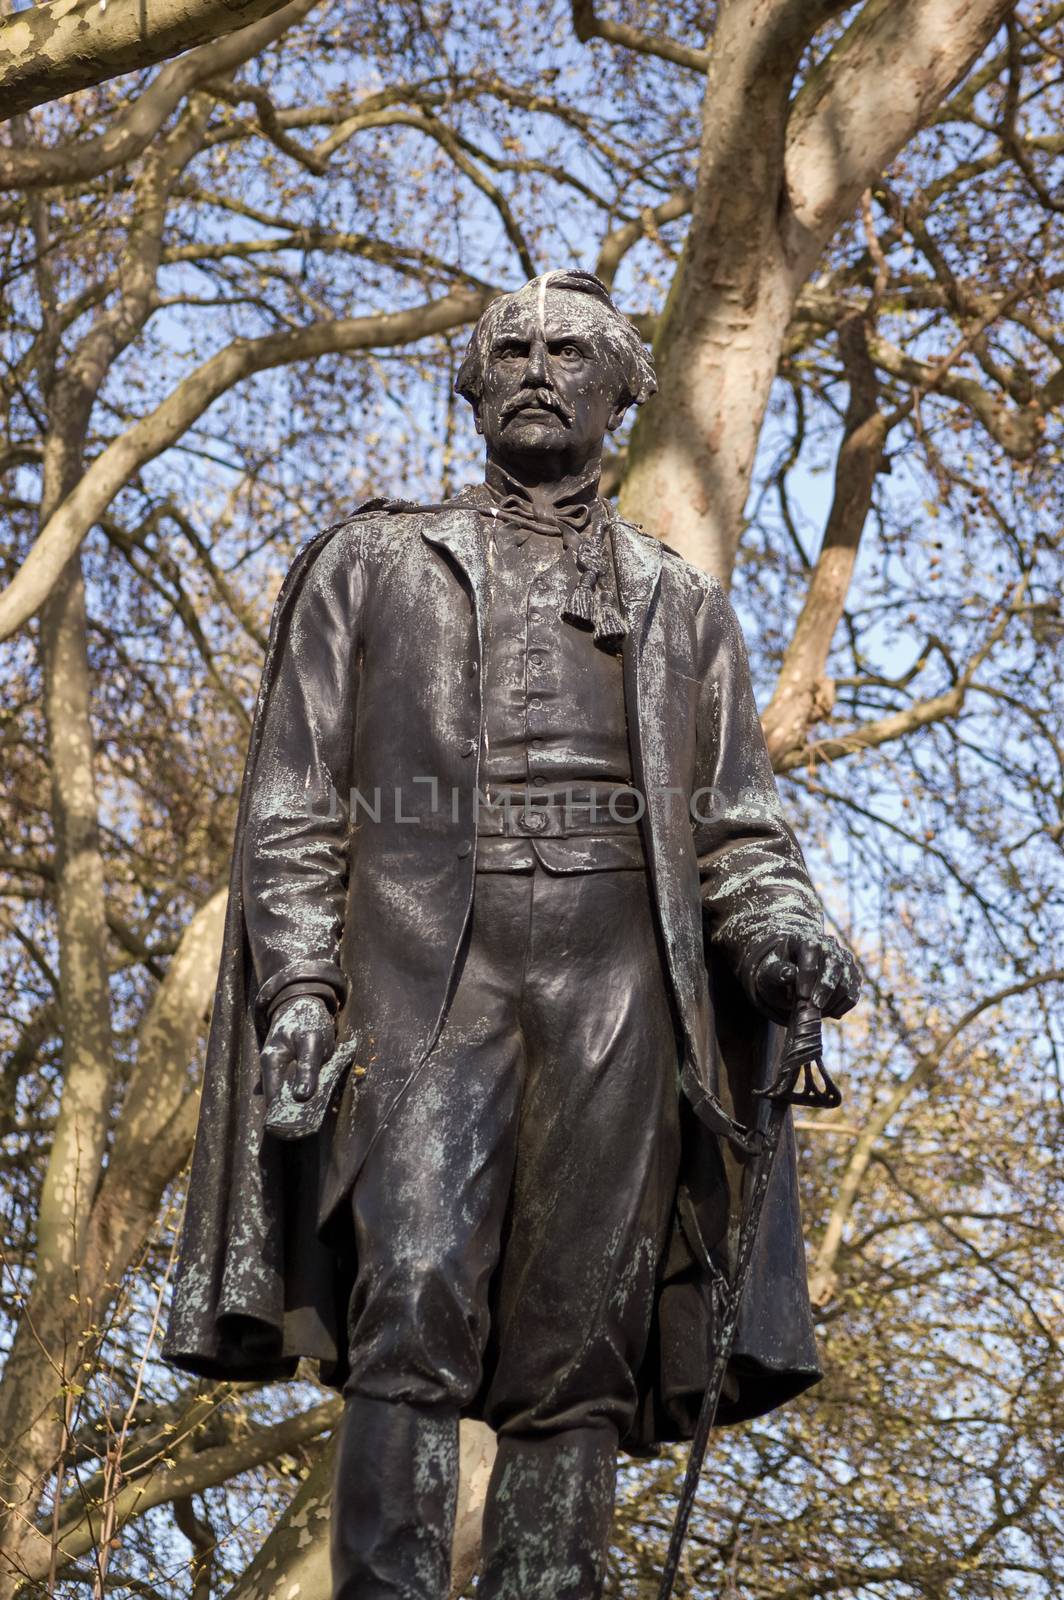 Statue of John, first Lord Lawrence in Waterloo Place, London.  He ruled the Punjab during the SEpoy Mutiny and was Viceroy of India.  Statue ereted 1882.